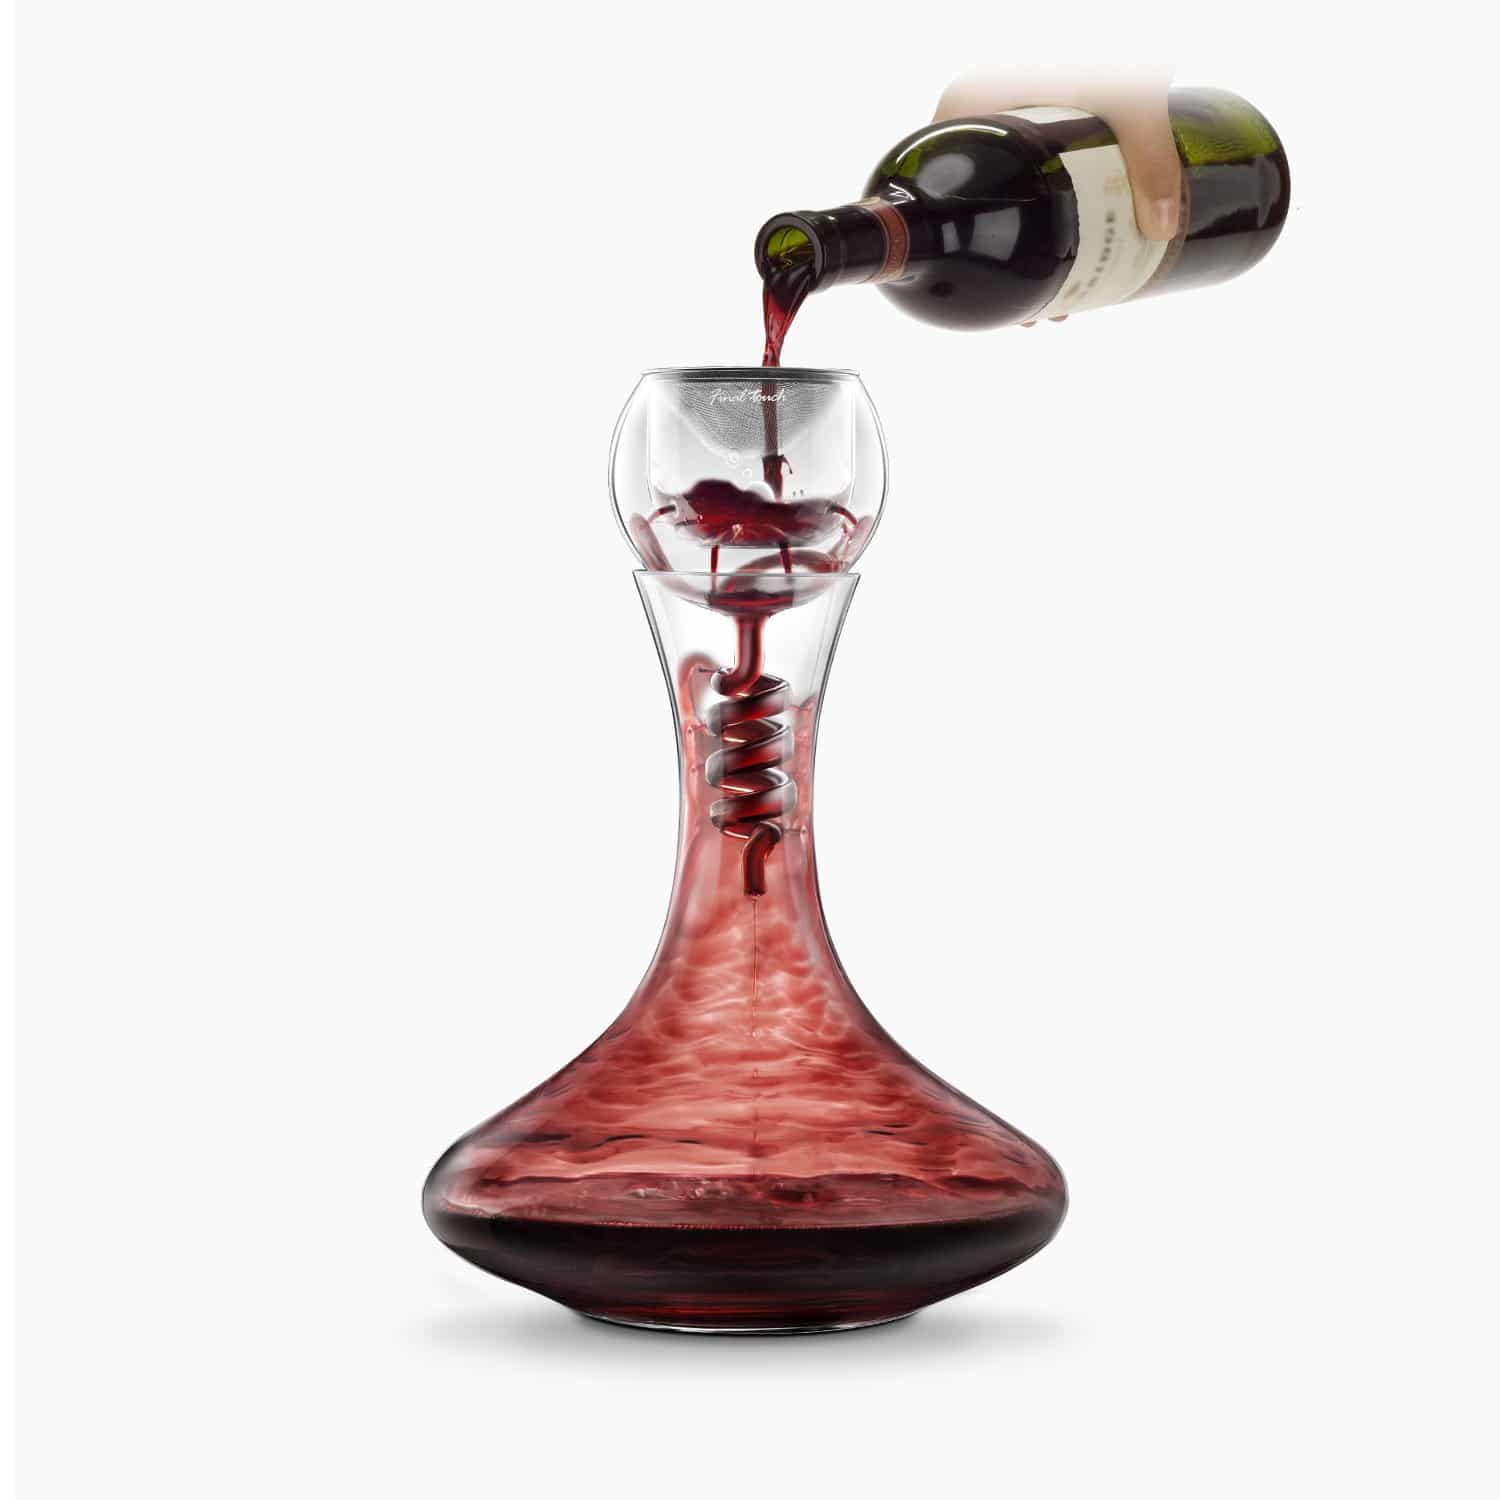 Final Touch Twister Wine Aerator Decanter -3657